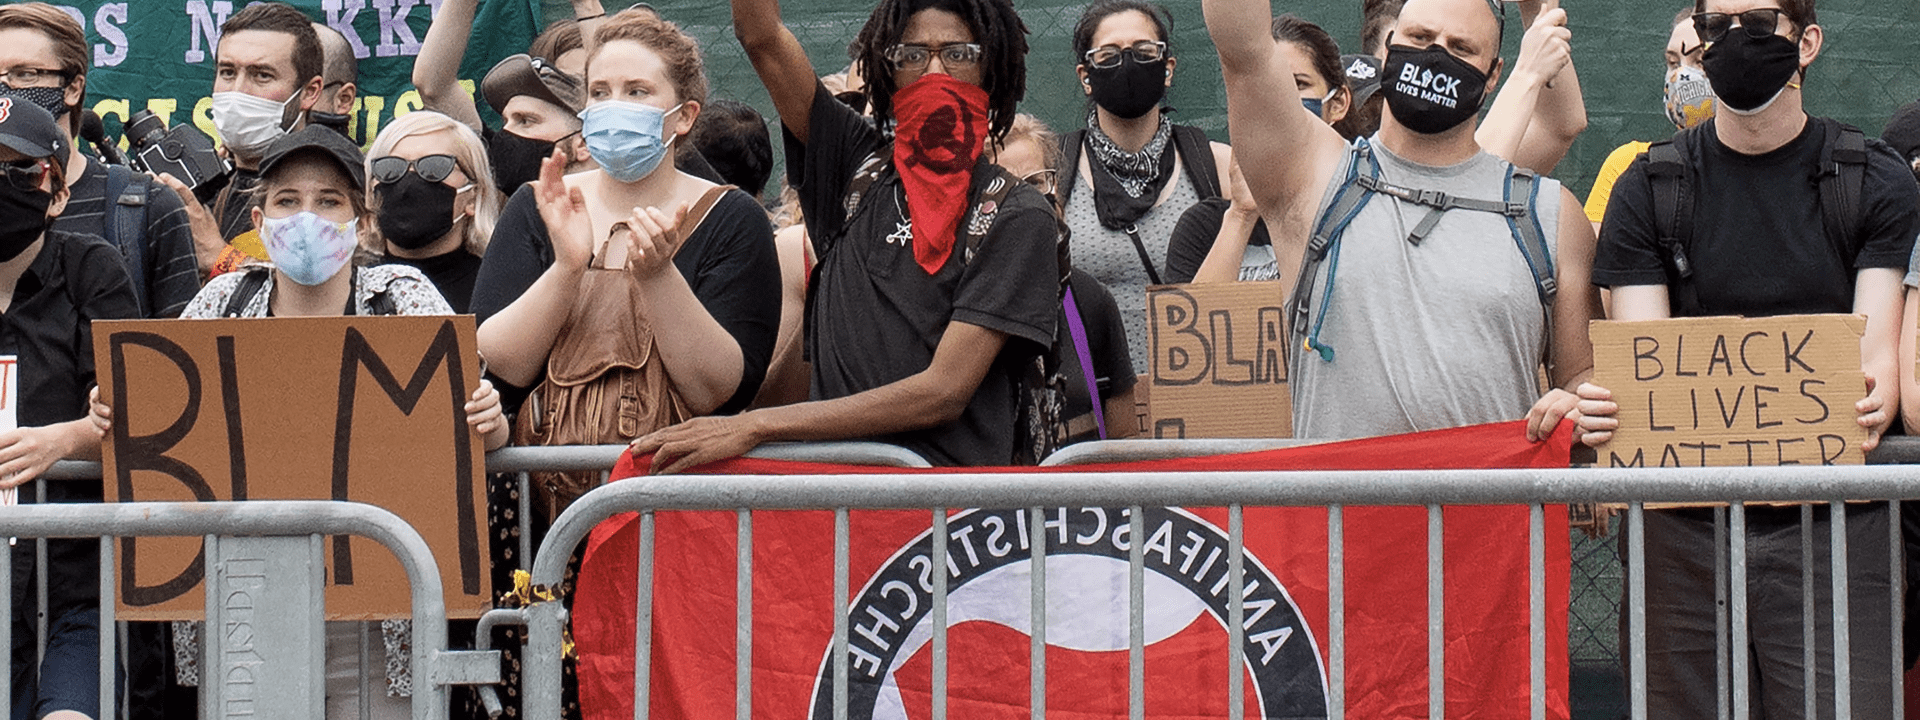 Disinformation about ‘antifa’ provides fodder for foreign propagandists